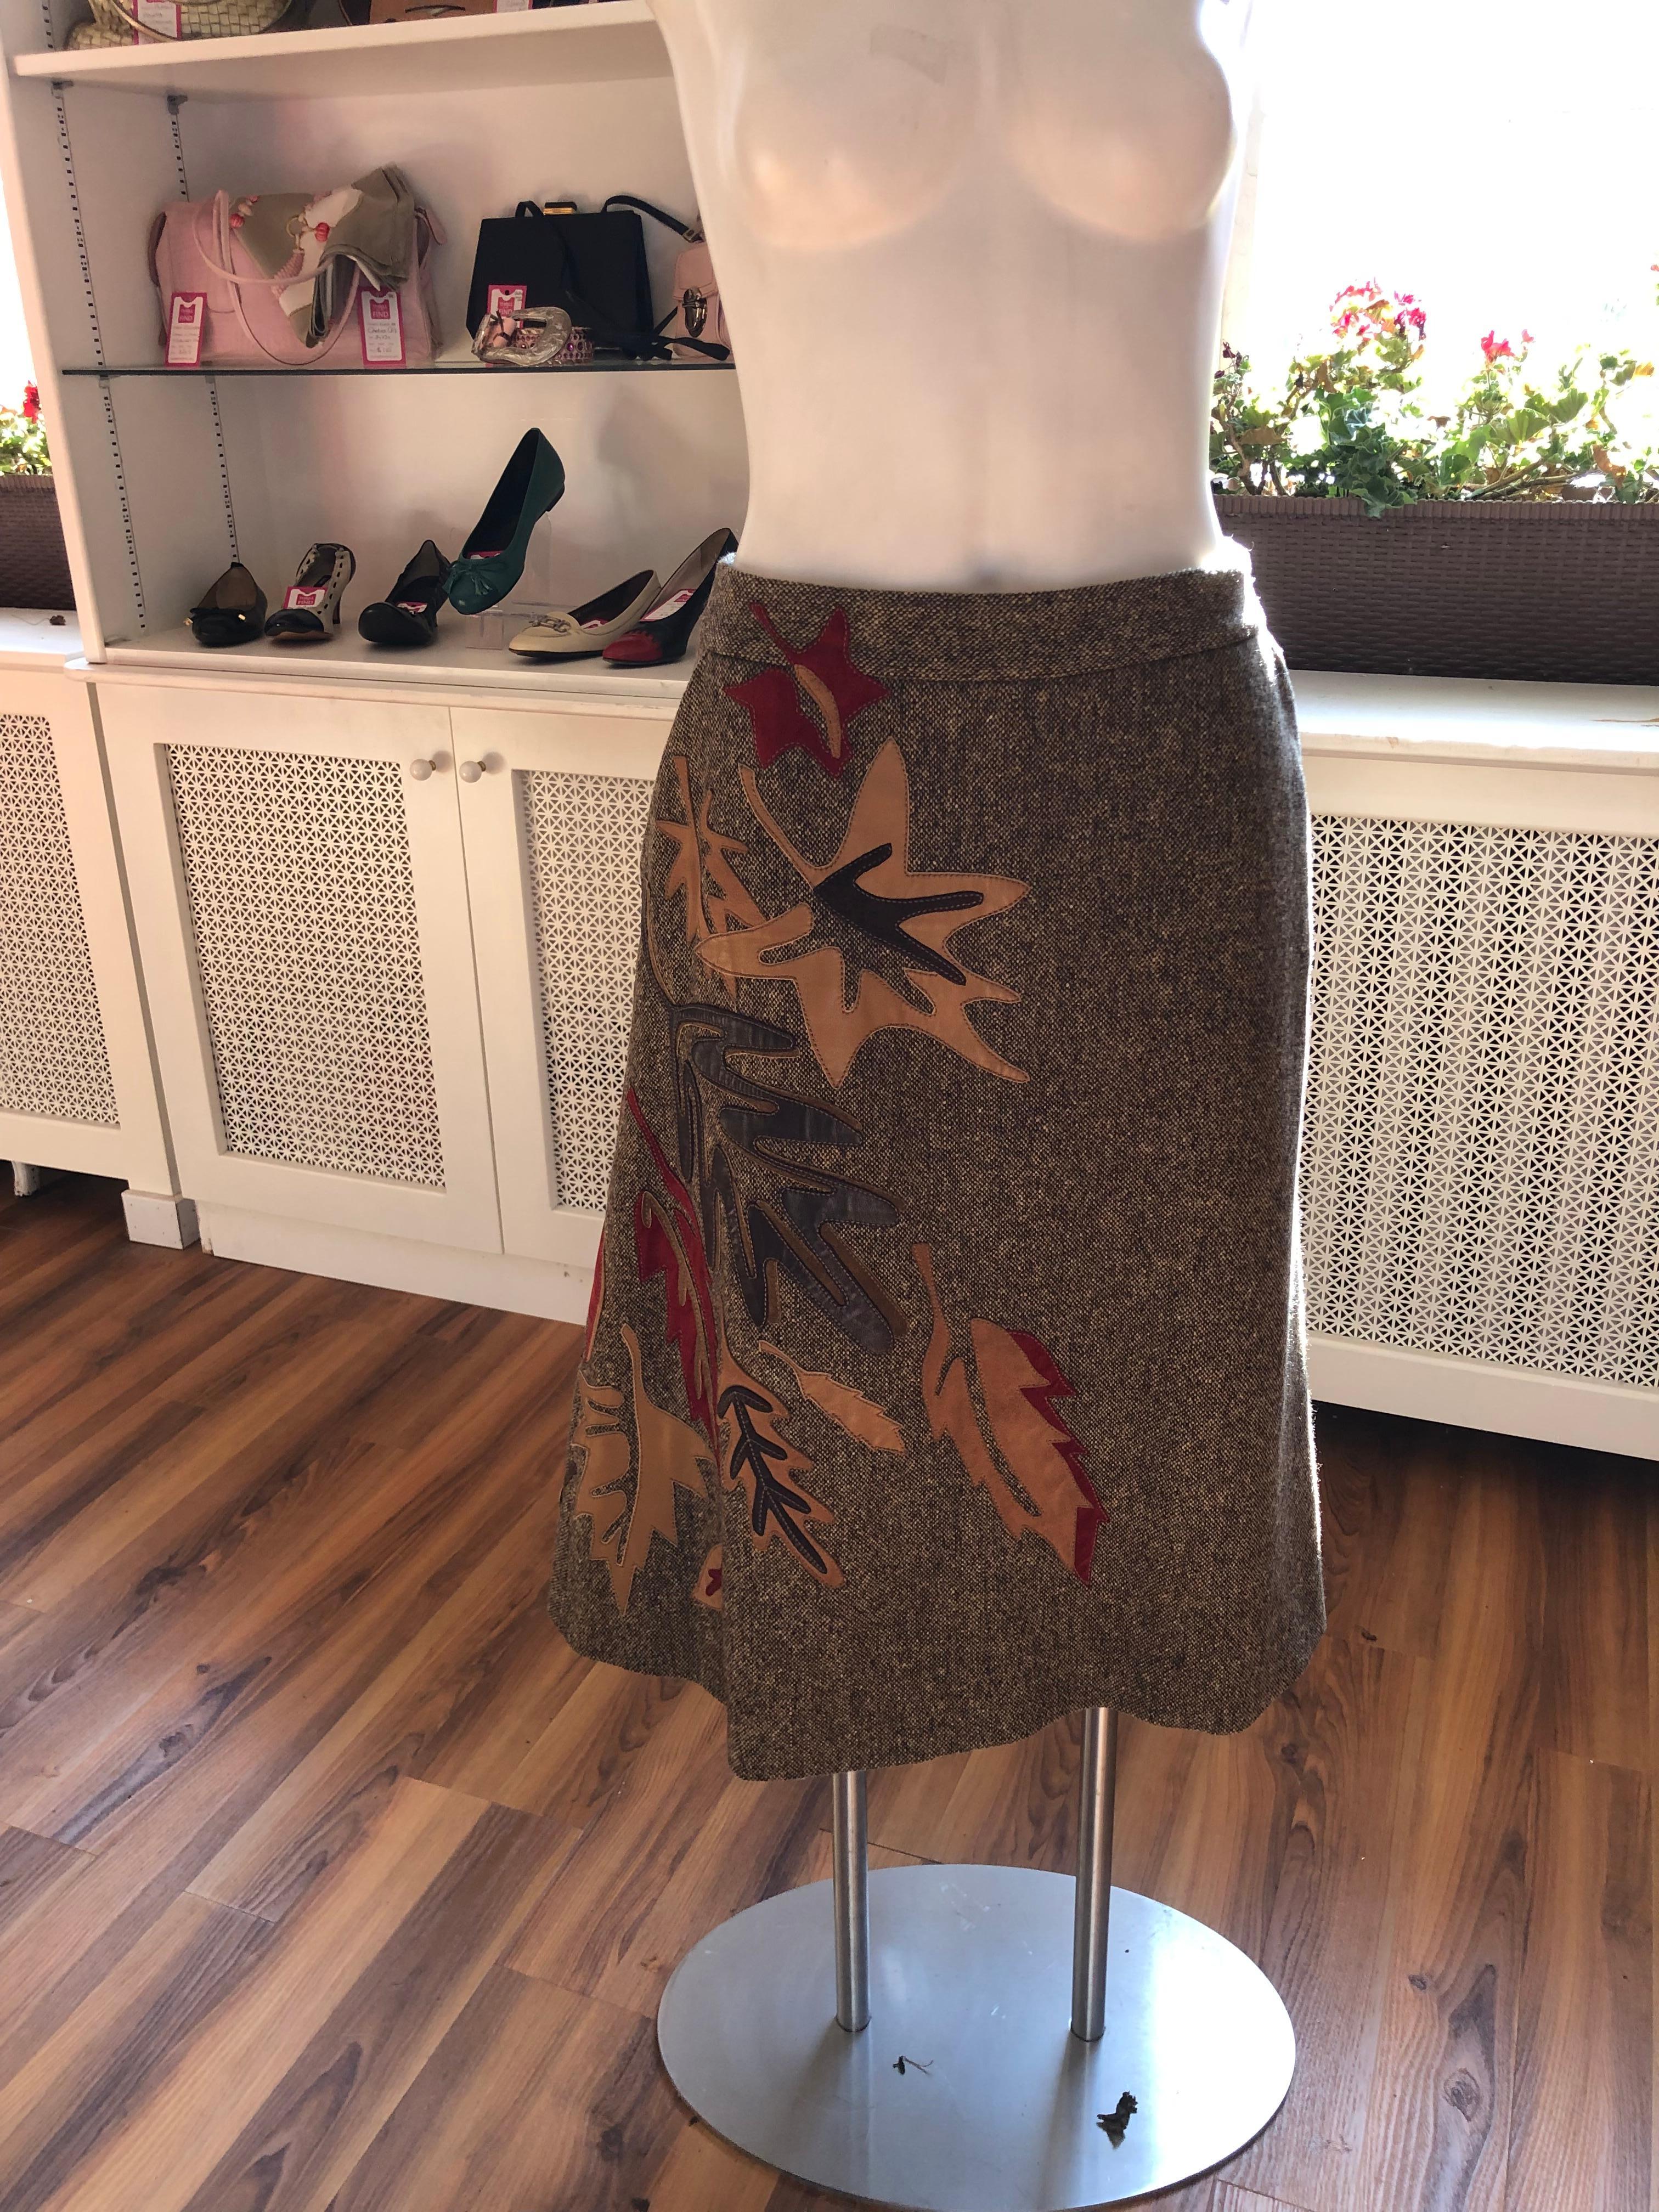 Superb brown brick tweed skirt with autumn colored suede and leather leaf appliques. The applique is strategically positioned on half the front and back and the colors are burnt red/orange, brown and beige. There are two slash pockets and the skirt